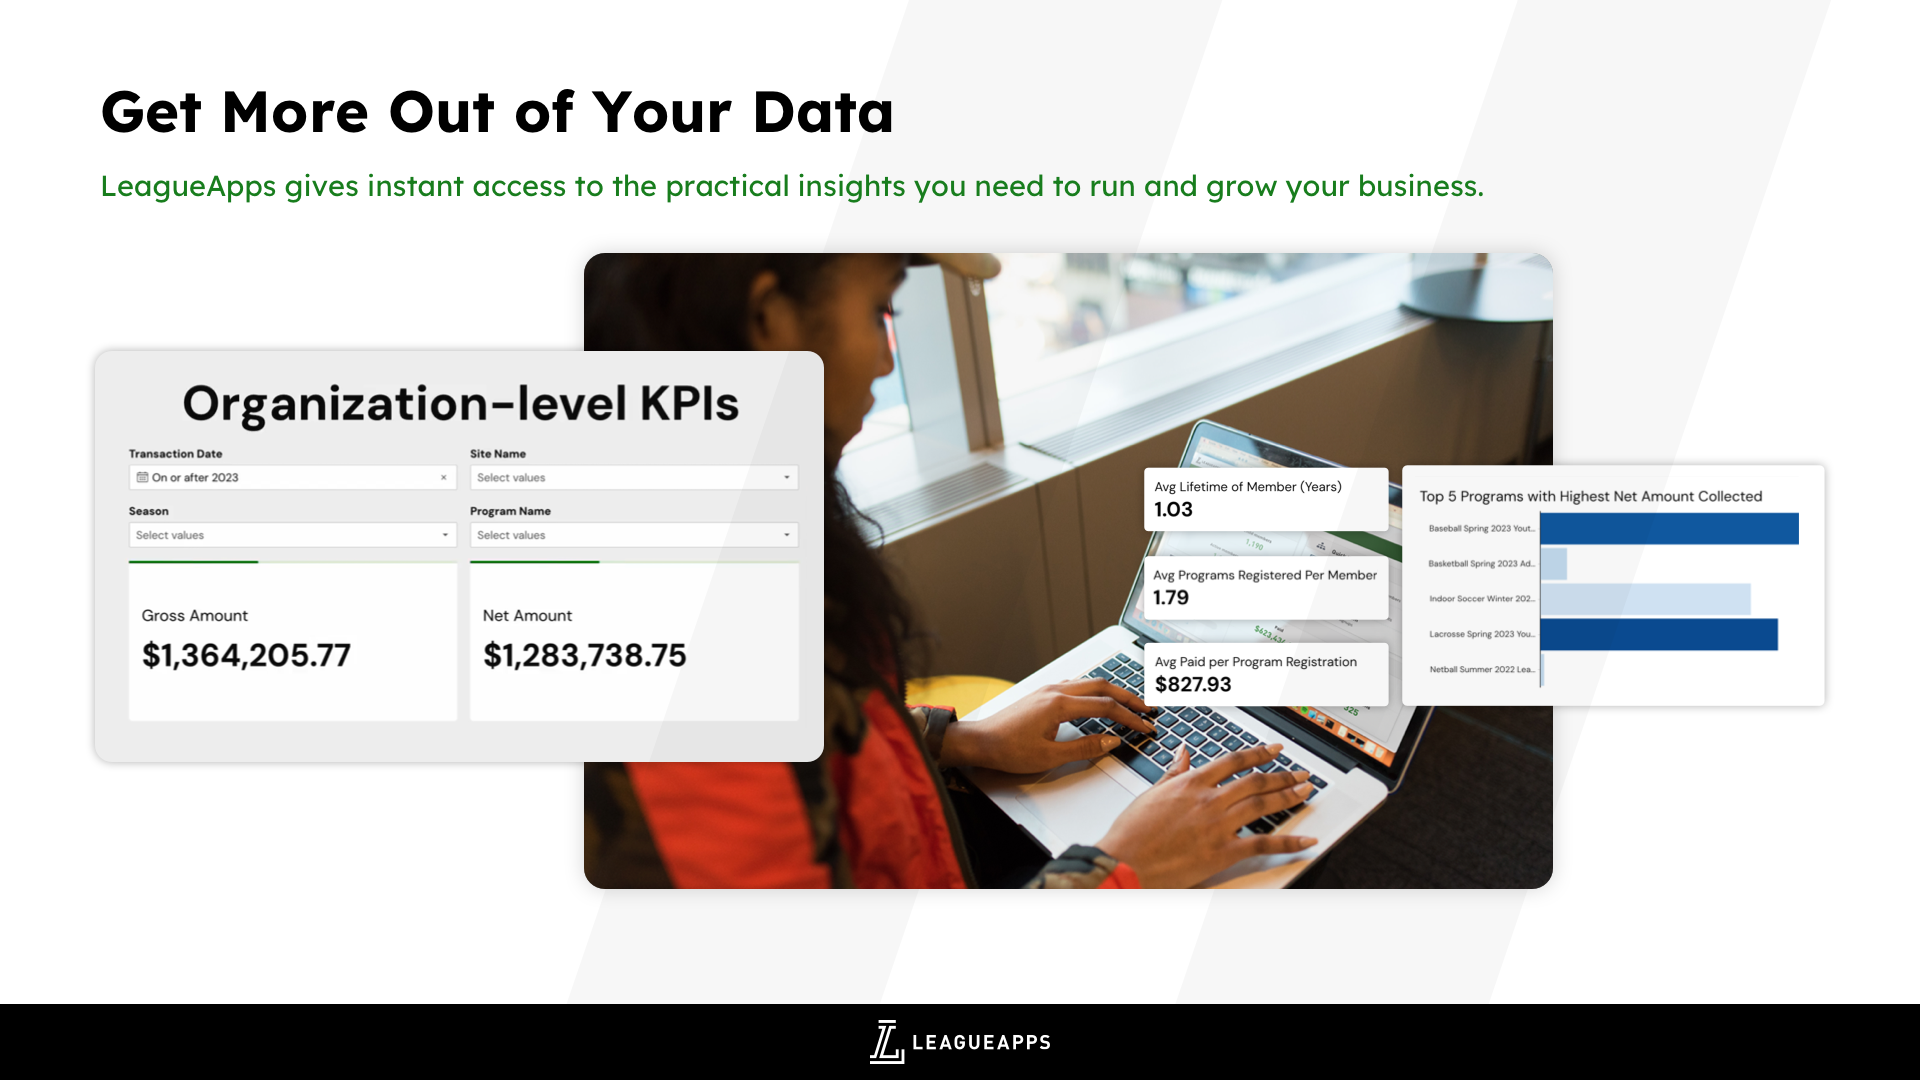 LeagueApps gives instant access to the practical insights you need to run and grow your business.